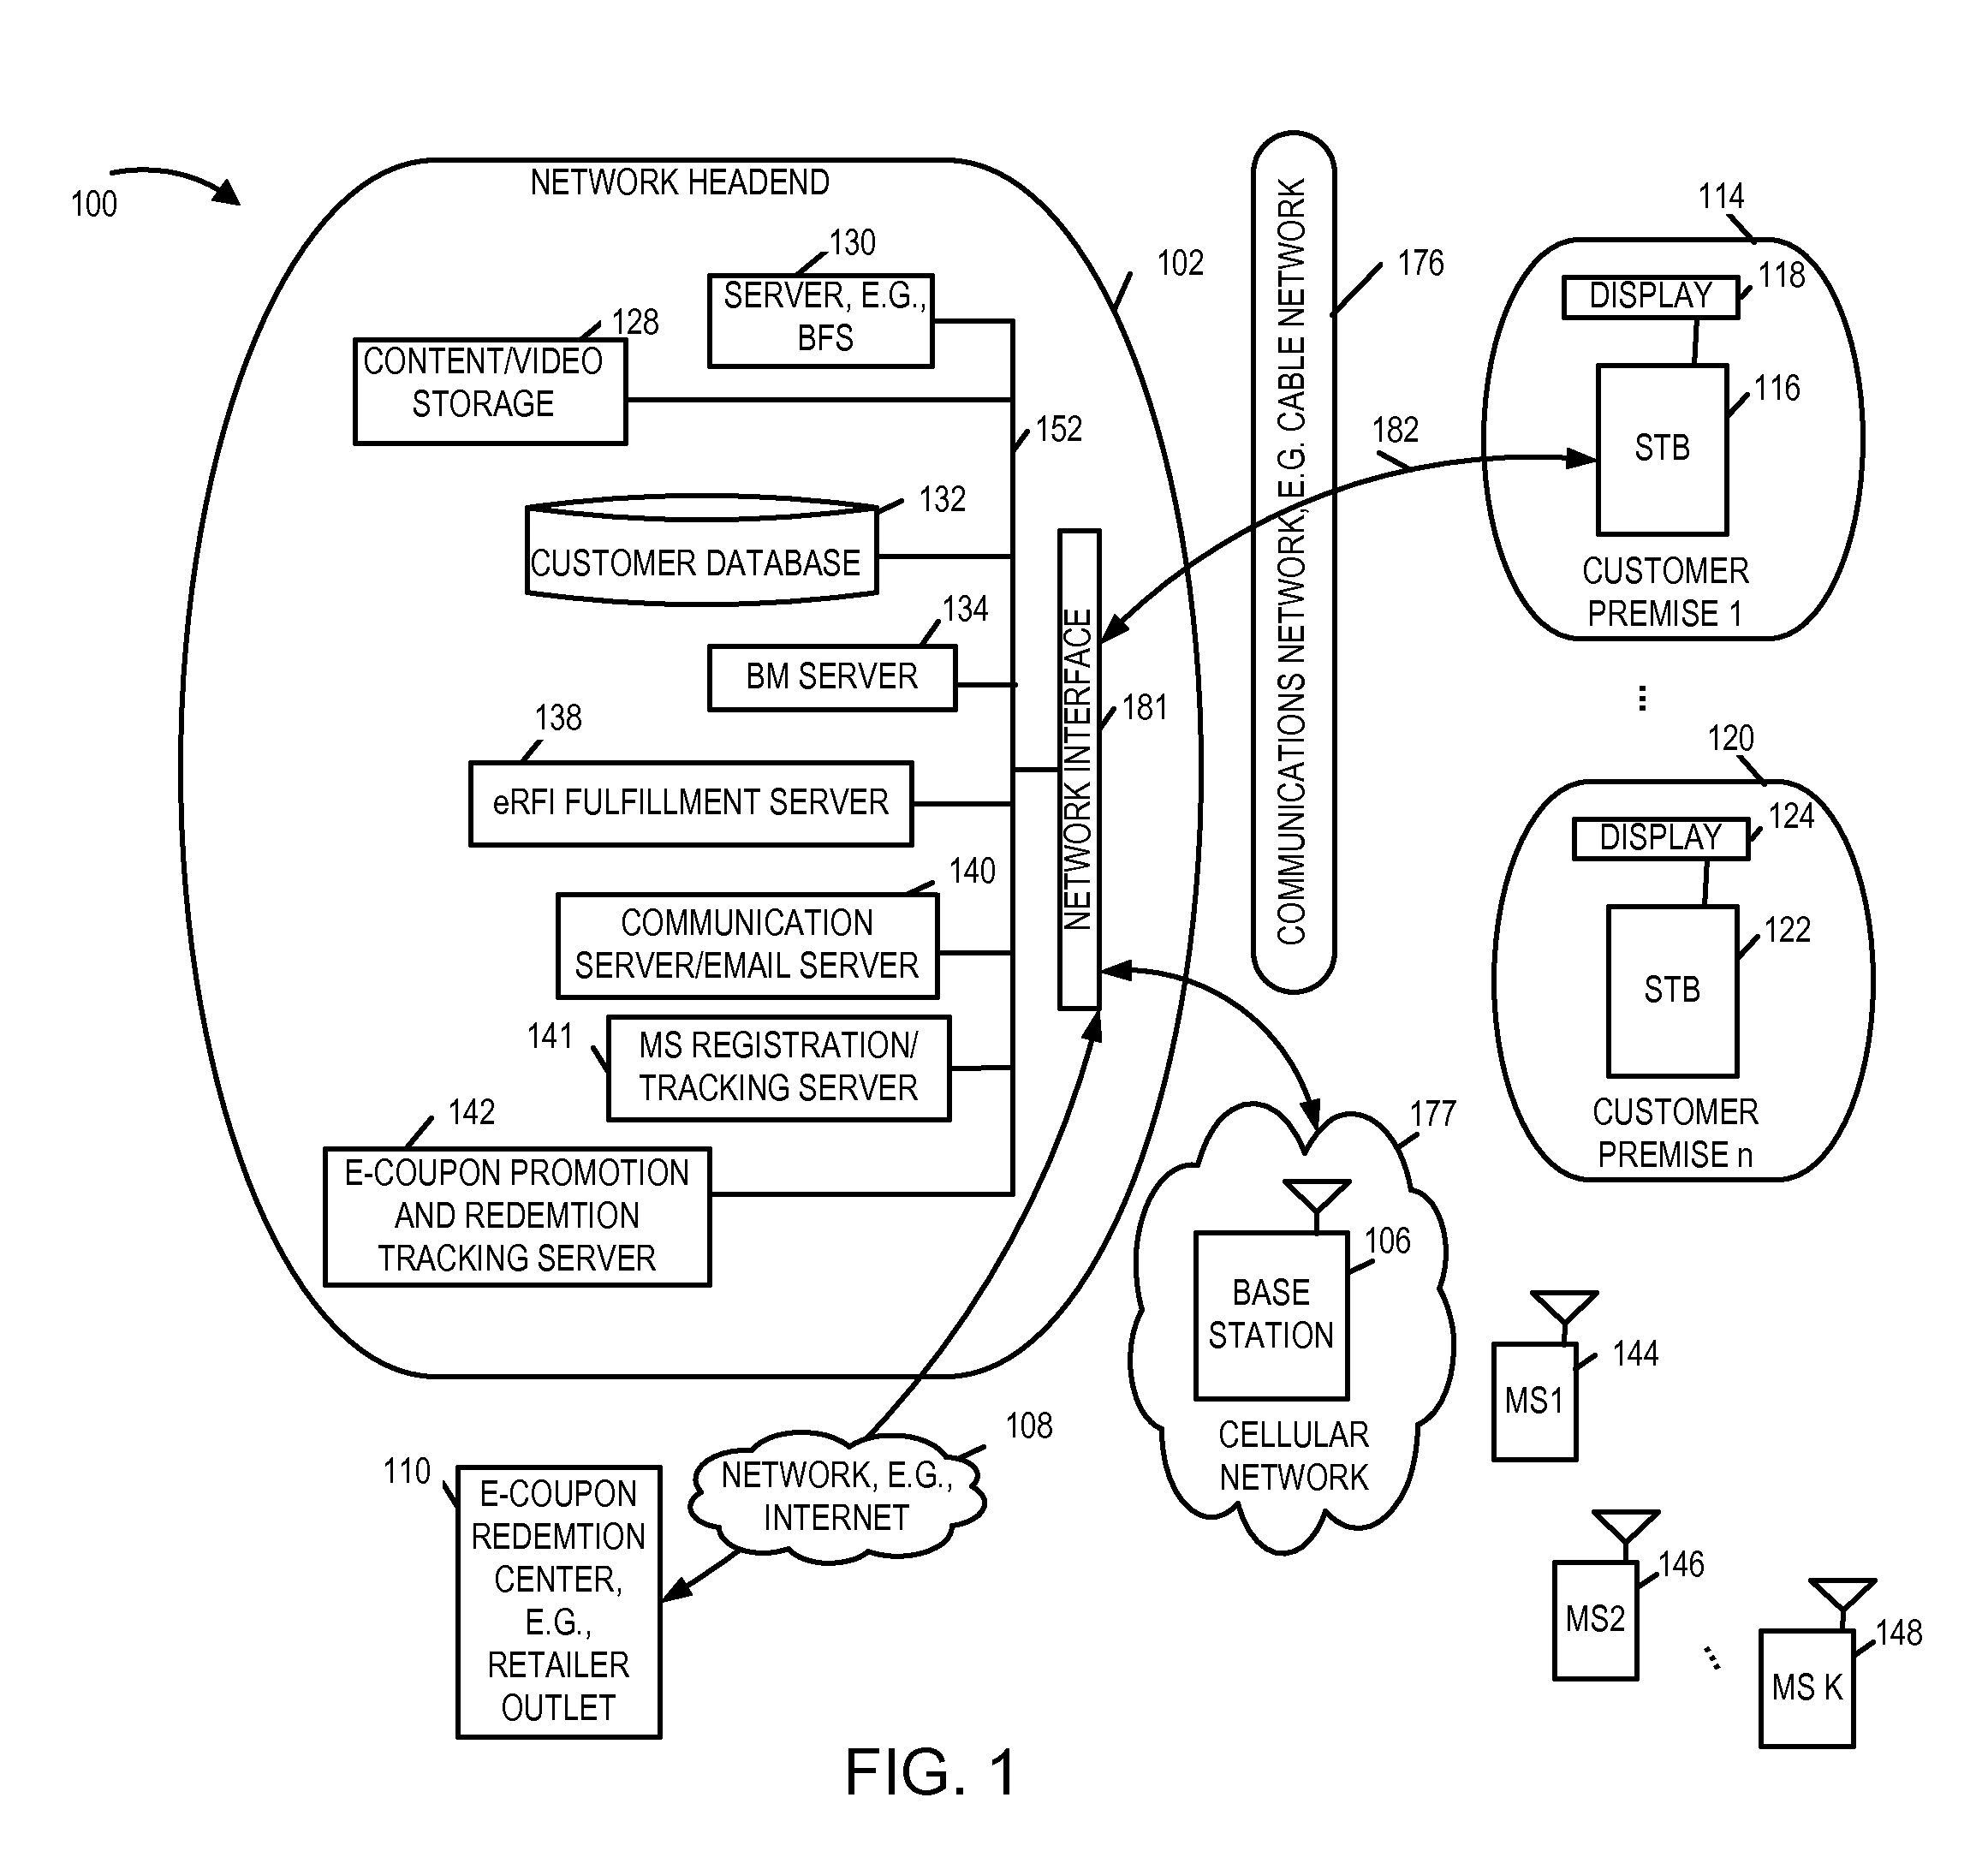 Methods and apparatus for supporting electronic requests for information and promotions on multiple device platforms in an integrated manner